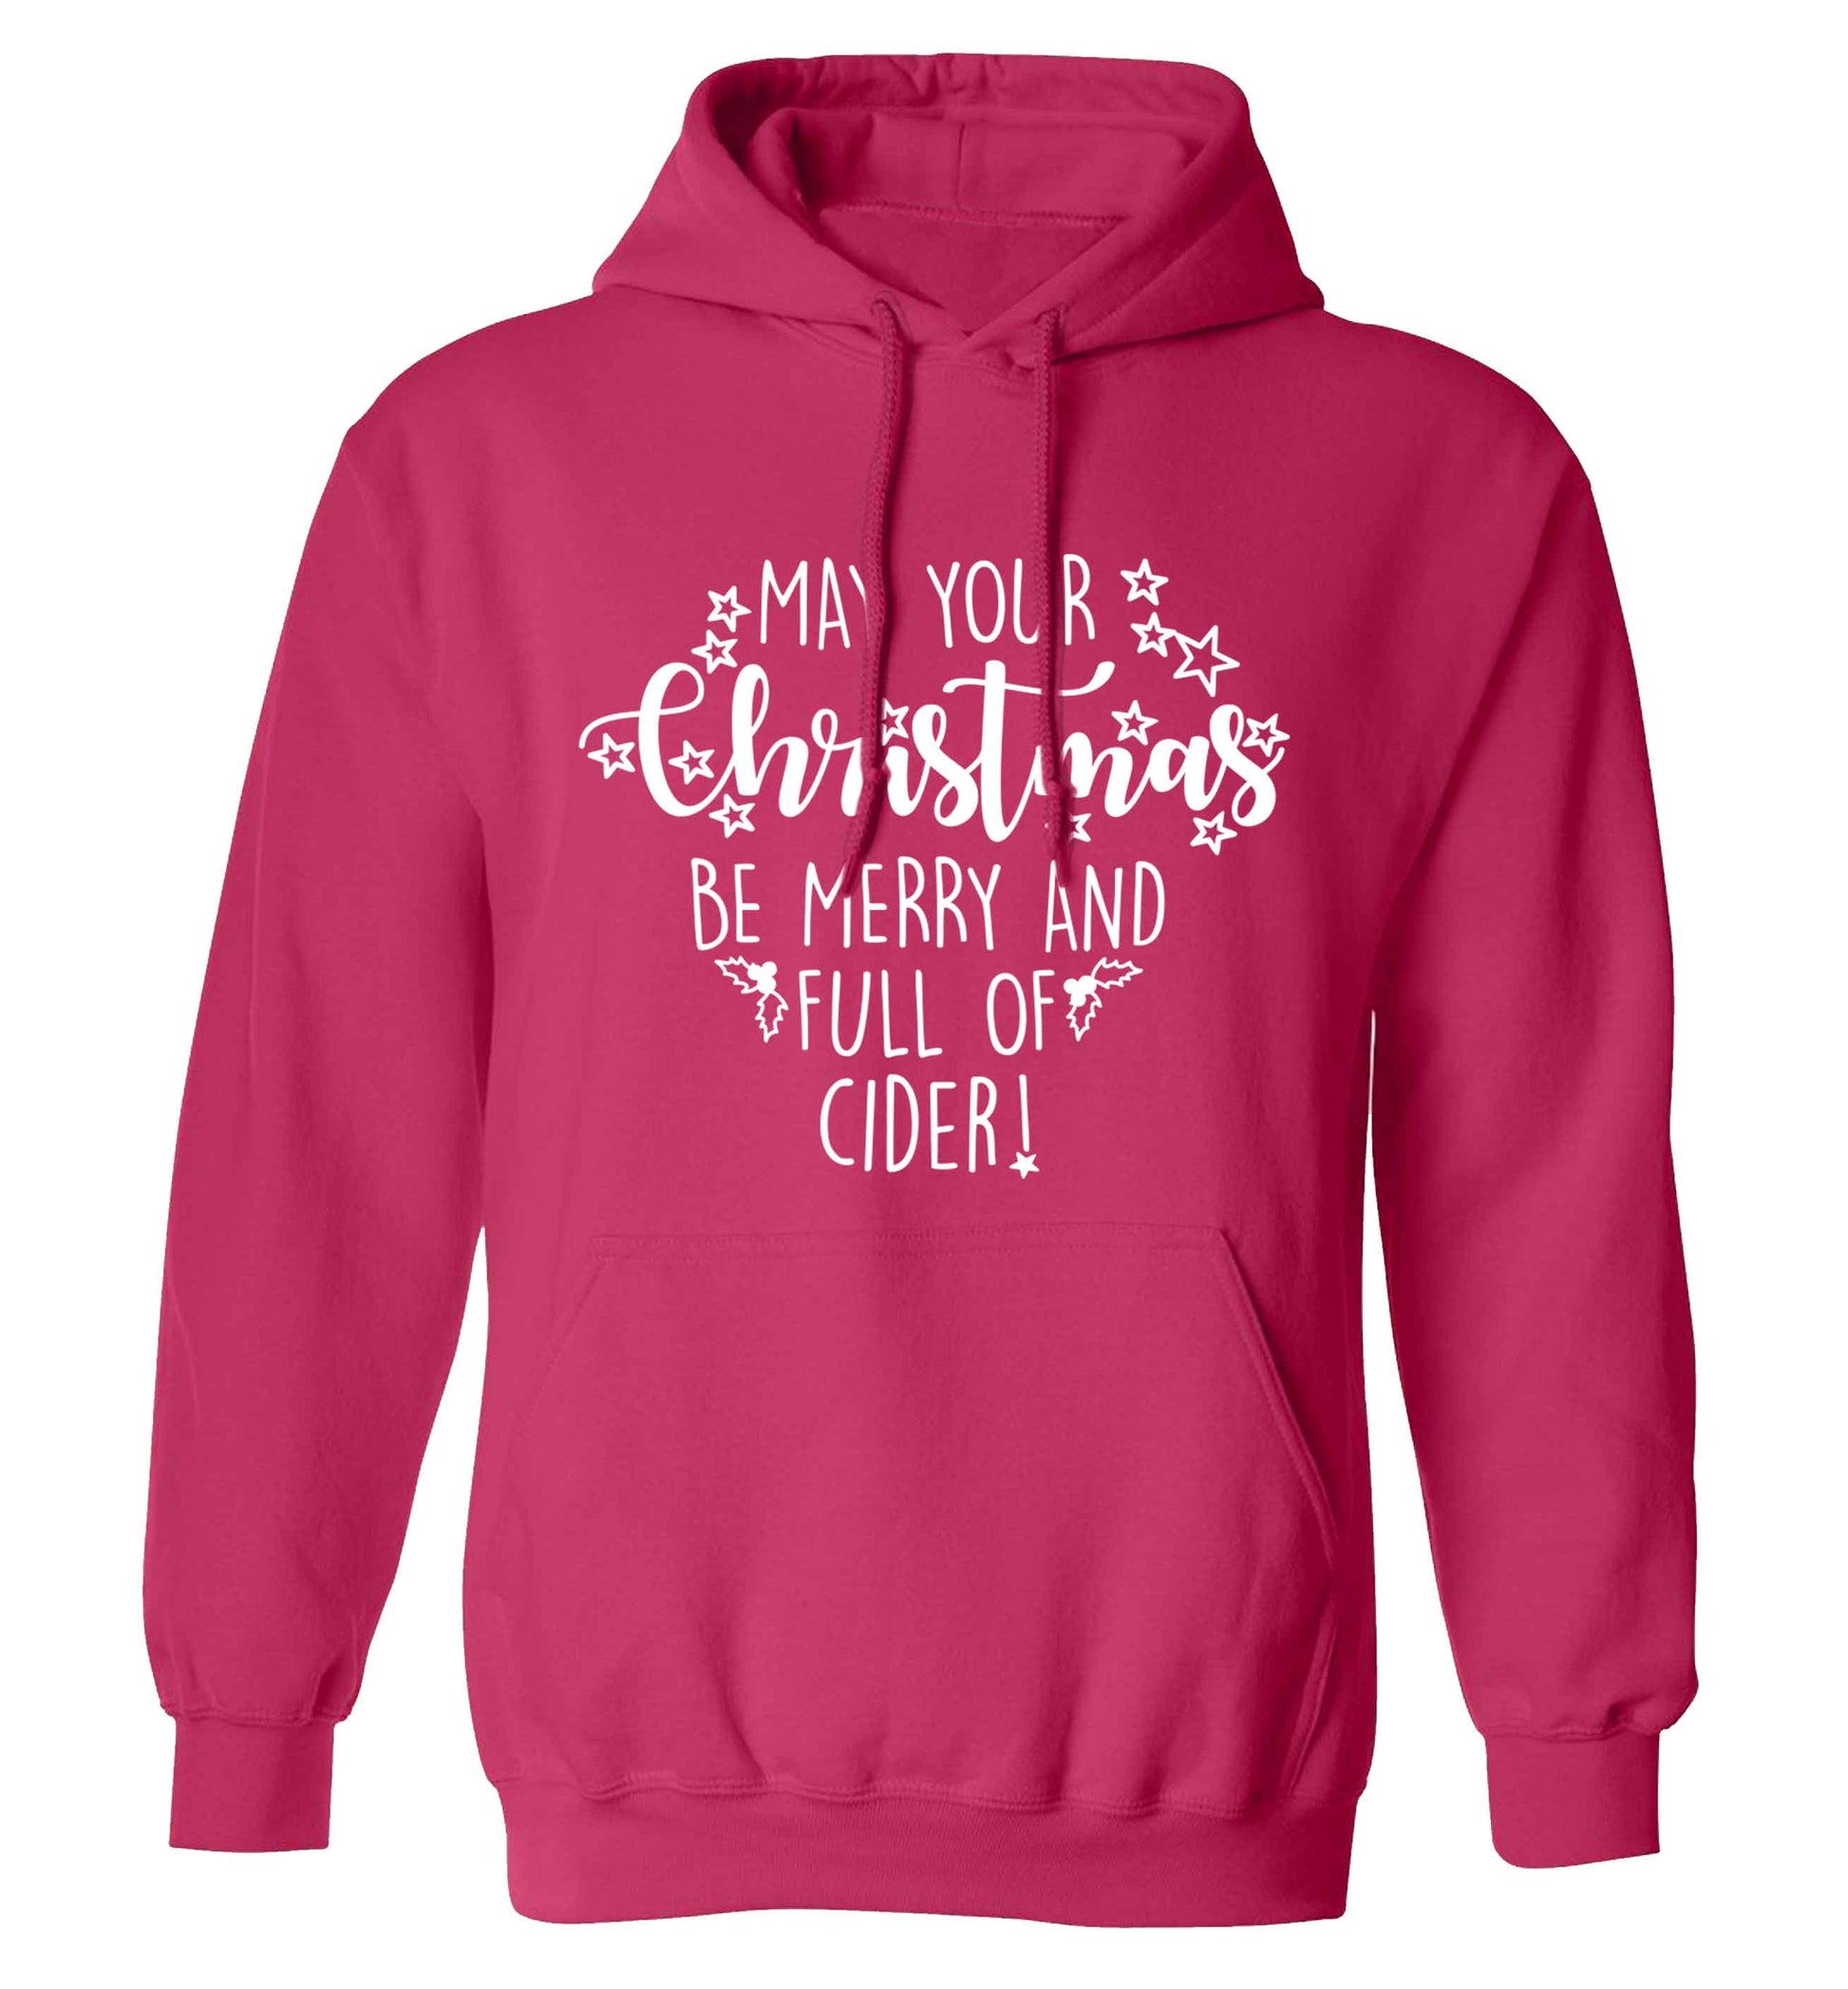 May your Christmas be merry and full of cider adults unisex pink hoodie 2XL